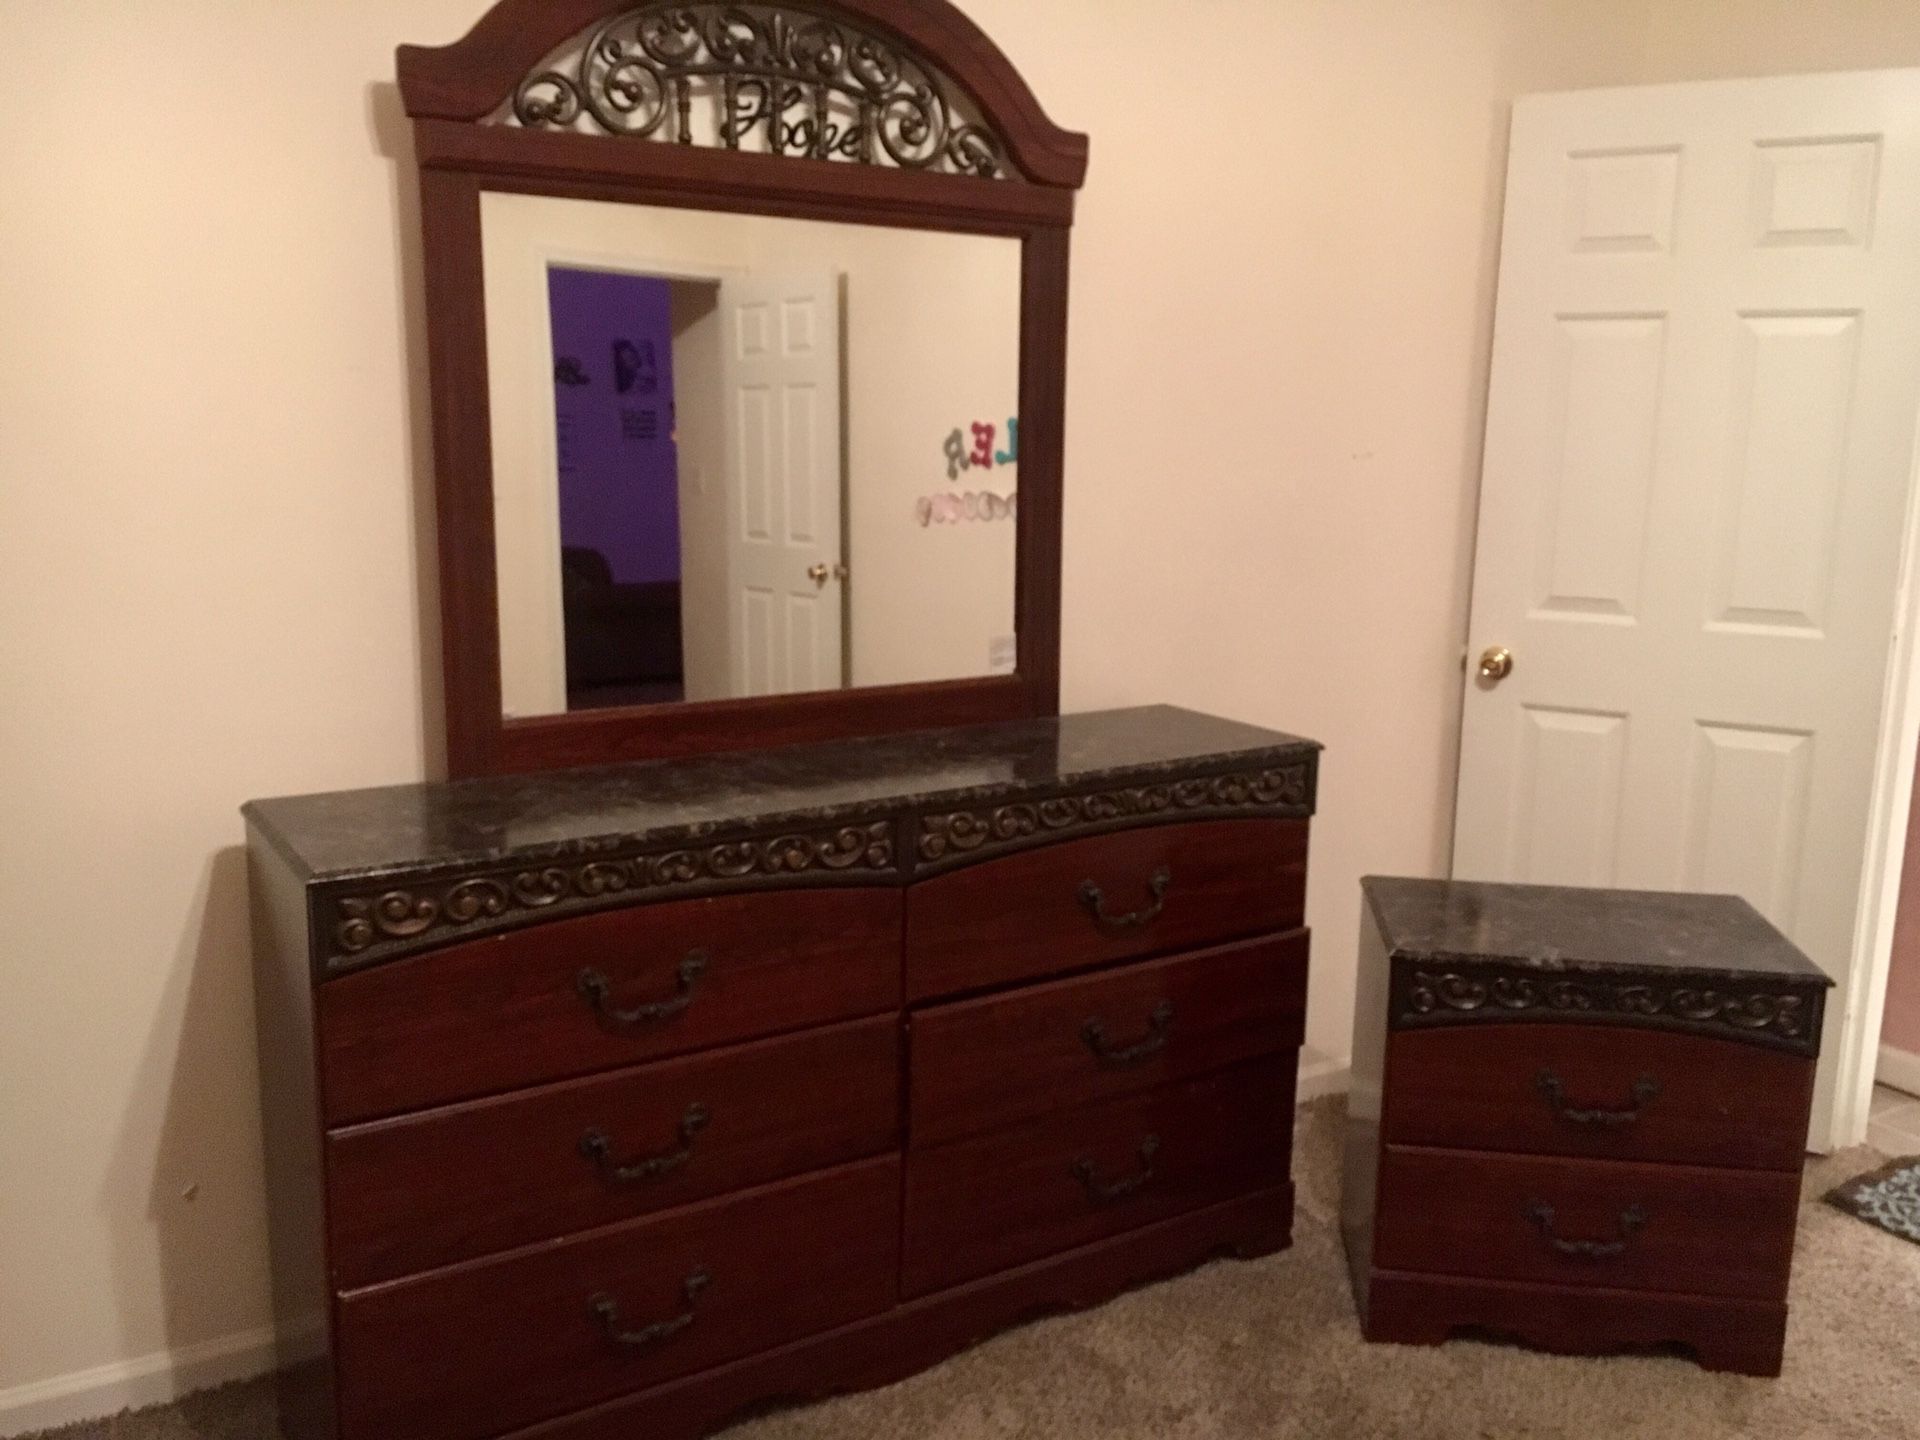 Mahogany wood dresser and nightstand set. One owner. Great condition